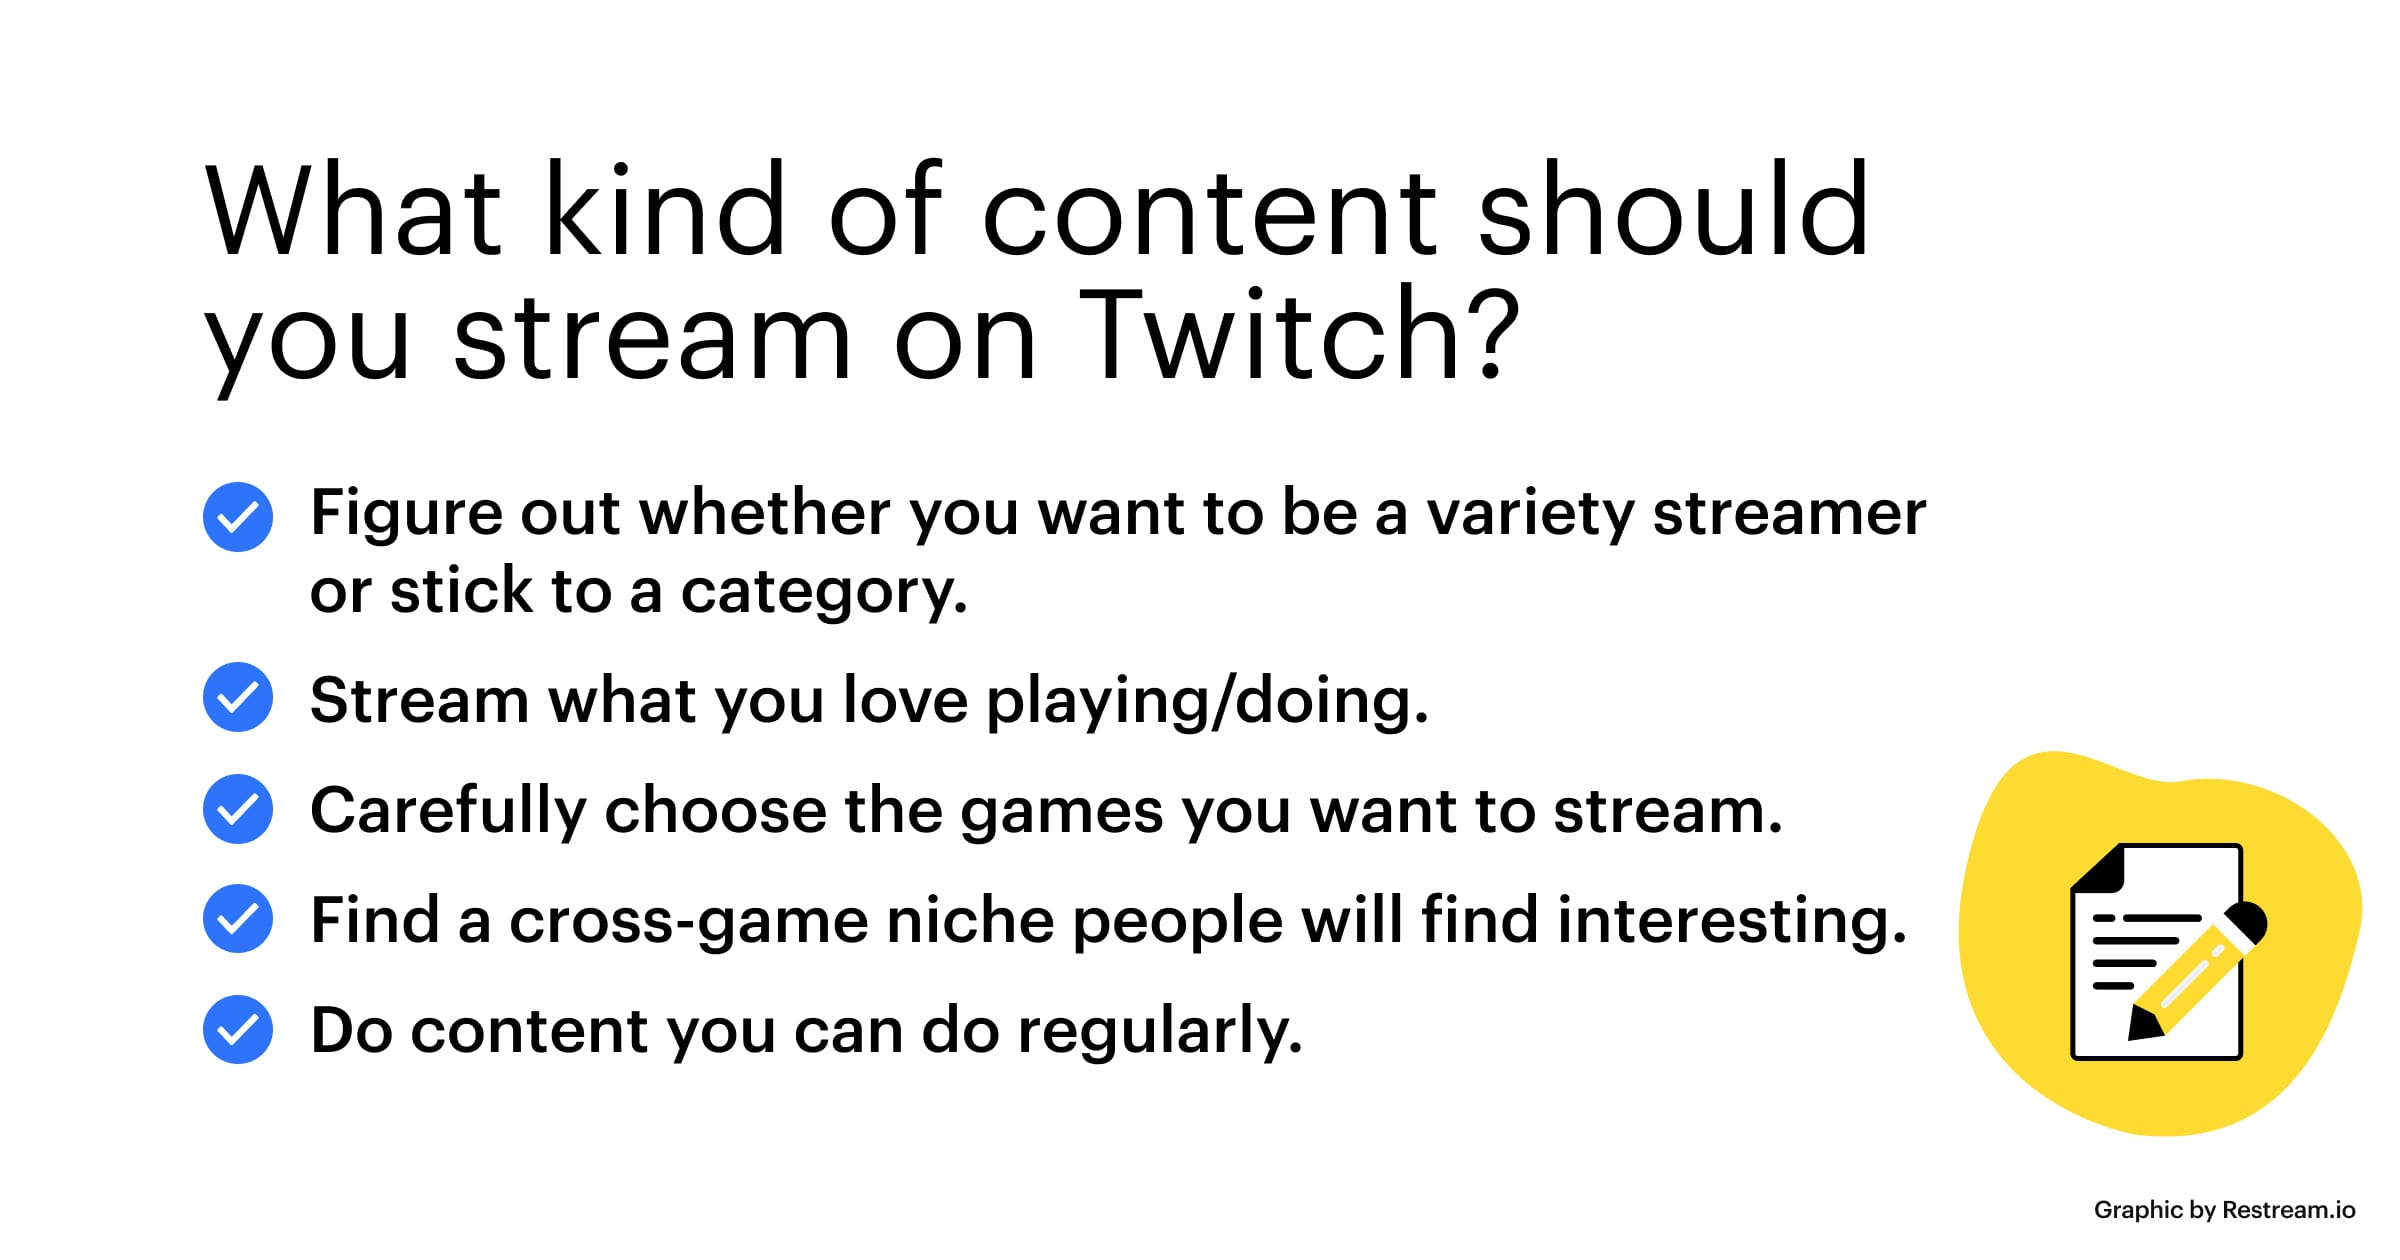 Checklist – What kind of content should you stream on Twitch?